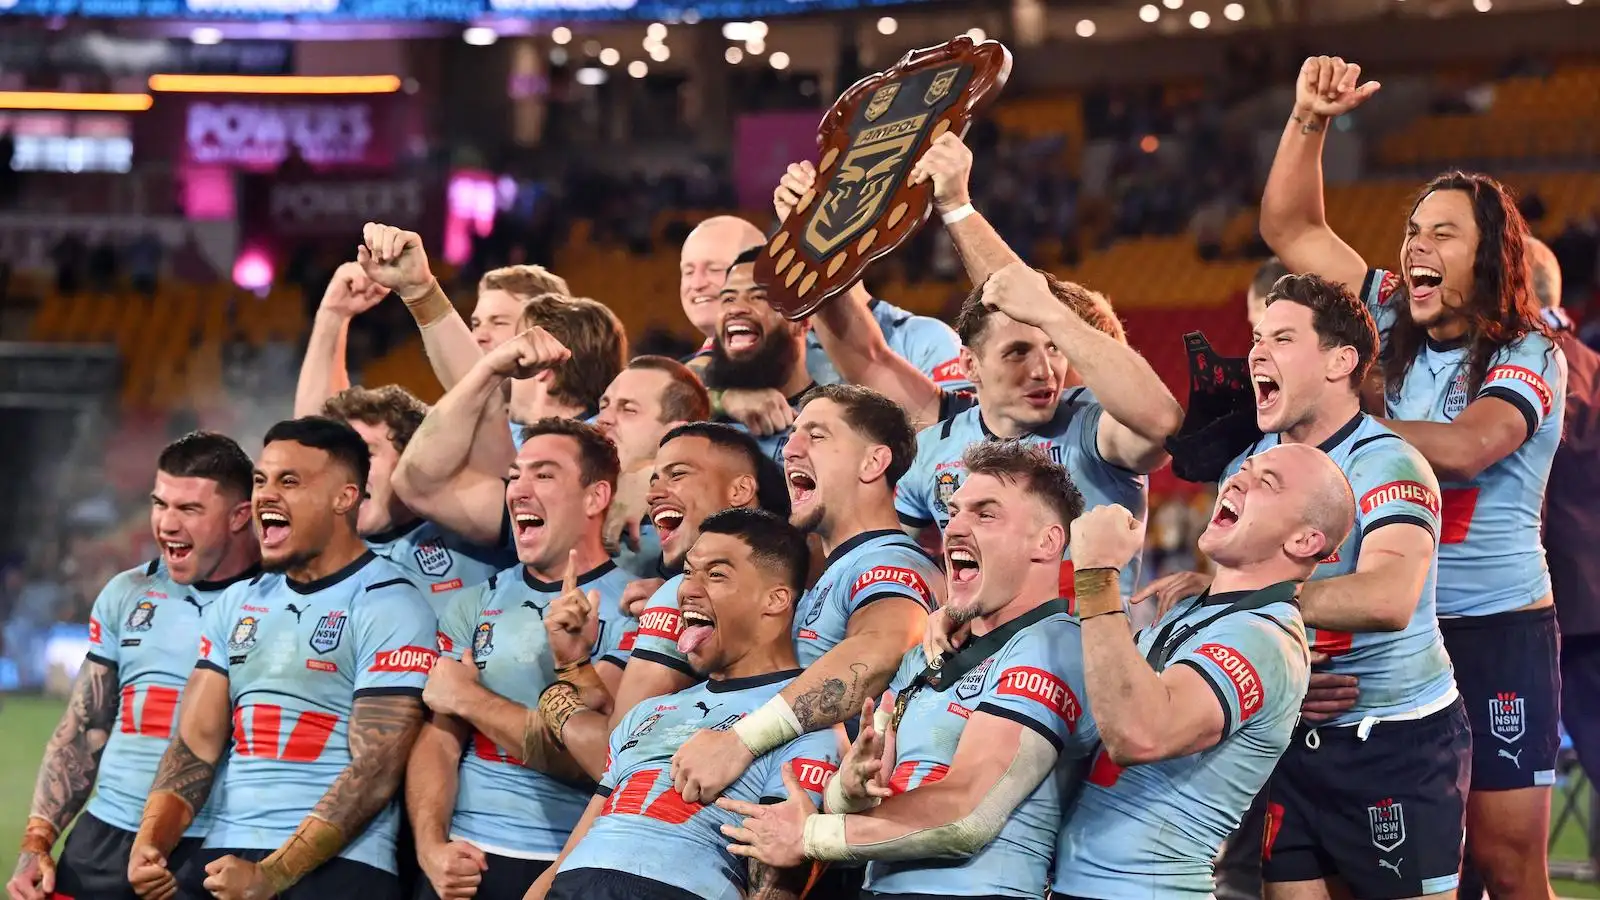 State of Origin III delivers one of rugby league’s all-time great games as New South Wales edge iconic tussle